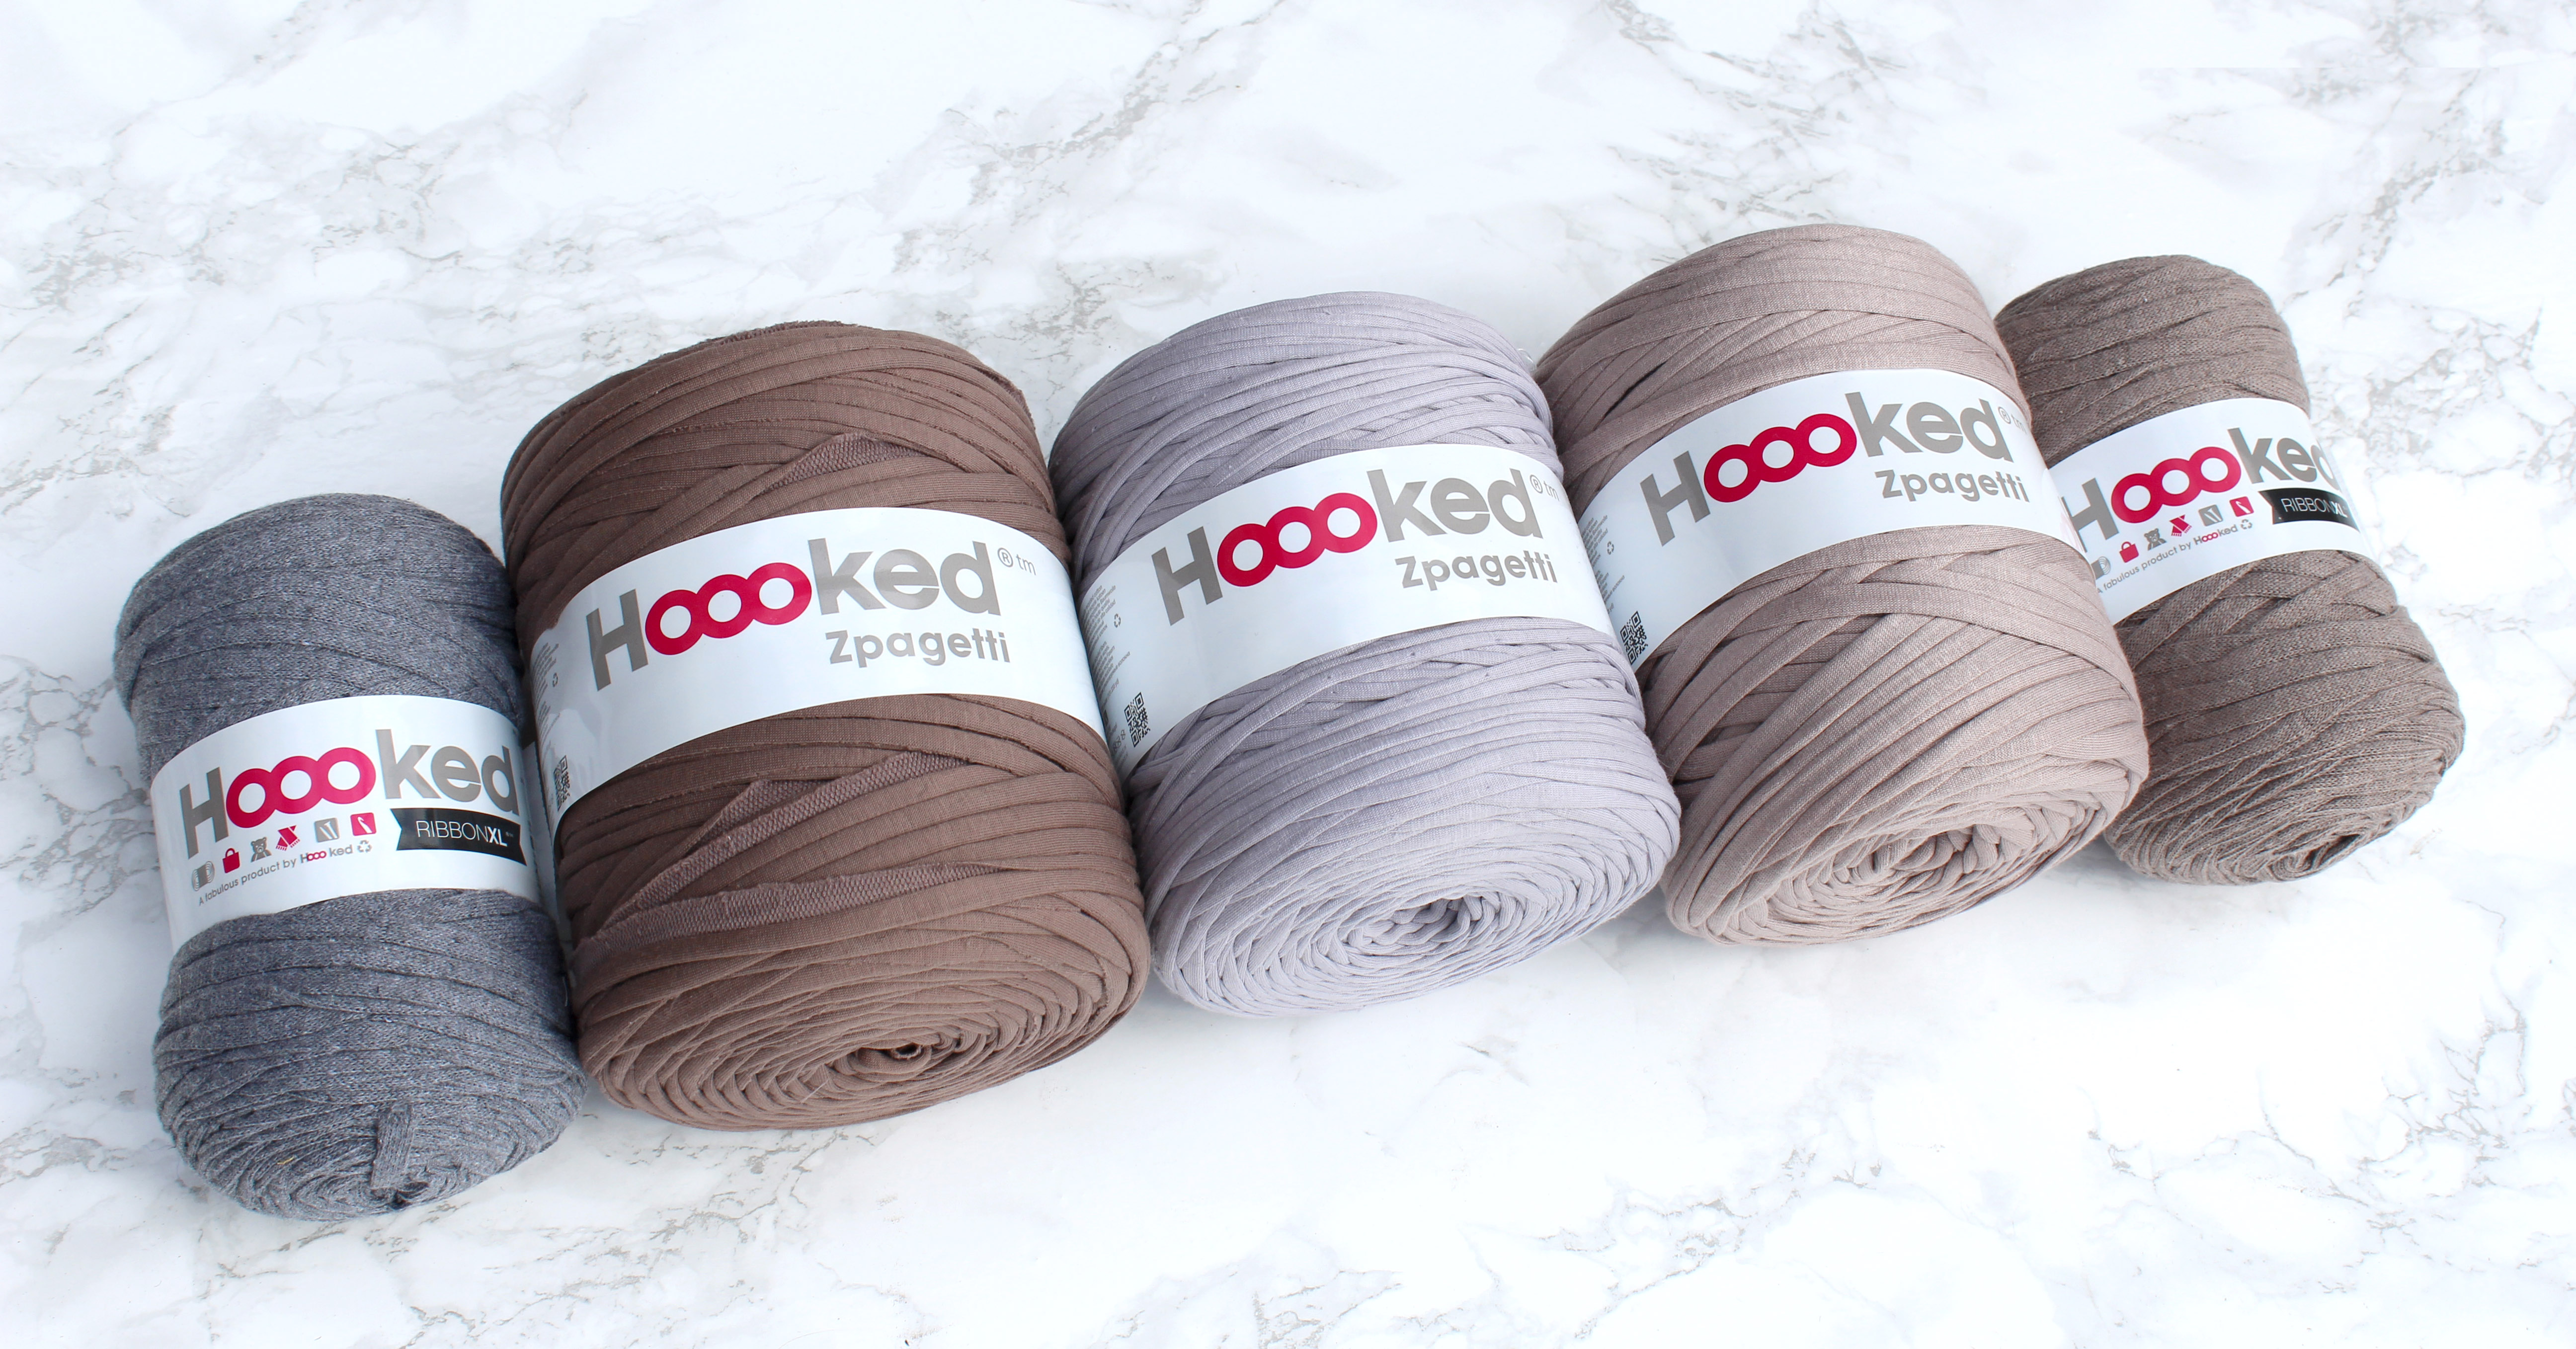 Hoooked Zpaghetti t-shirt yarn for rag rugging in neutral colours including greys and browns